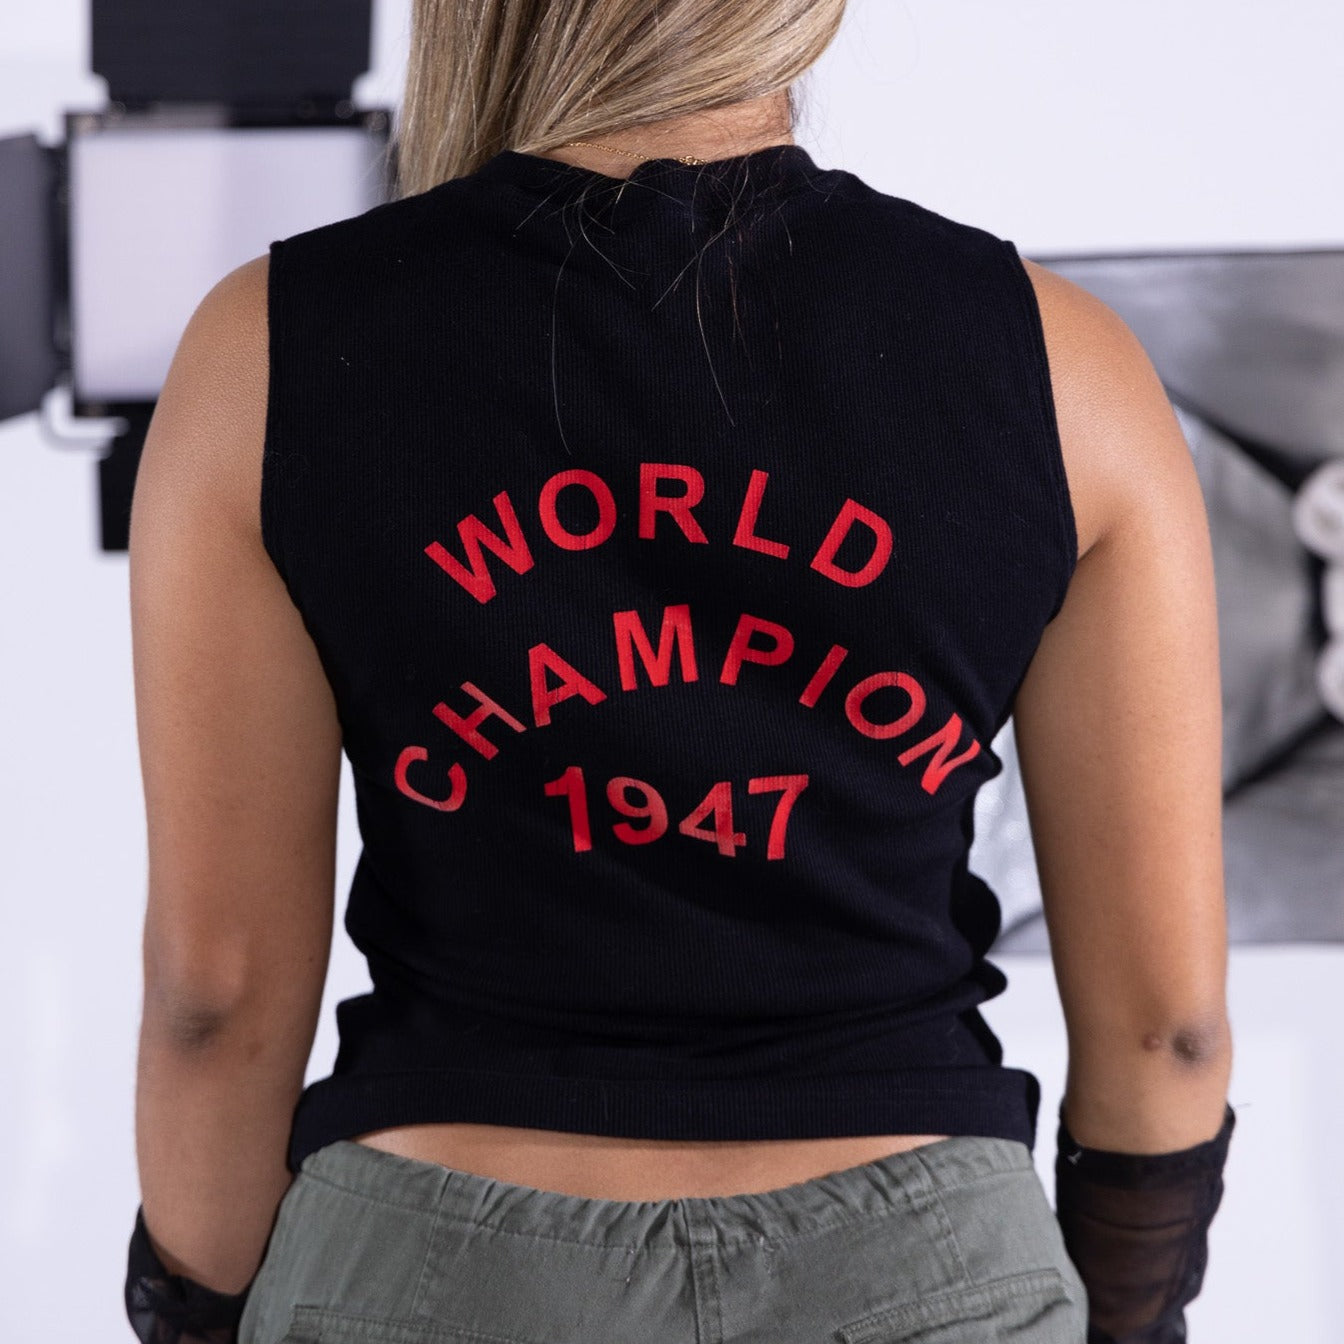 J'adore Dior World Champion 1947 Top. The words “world champion 1947” printed on the back & “j’adore dior” on the front .